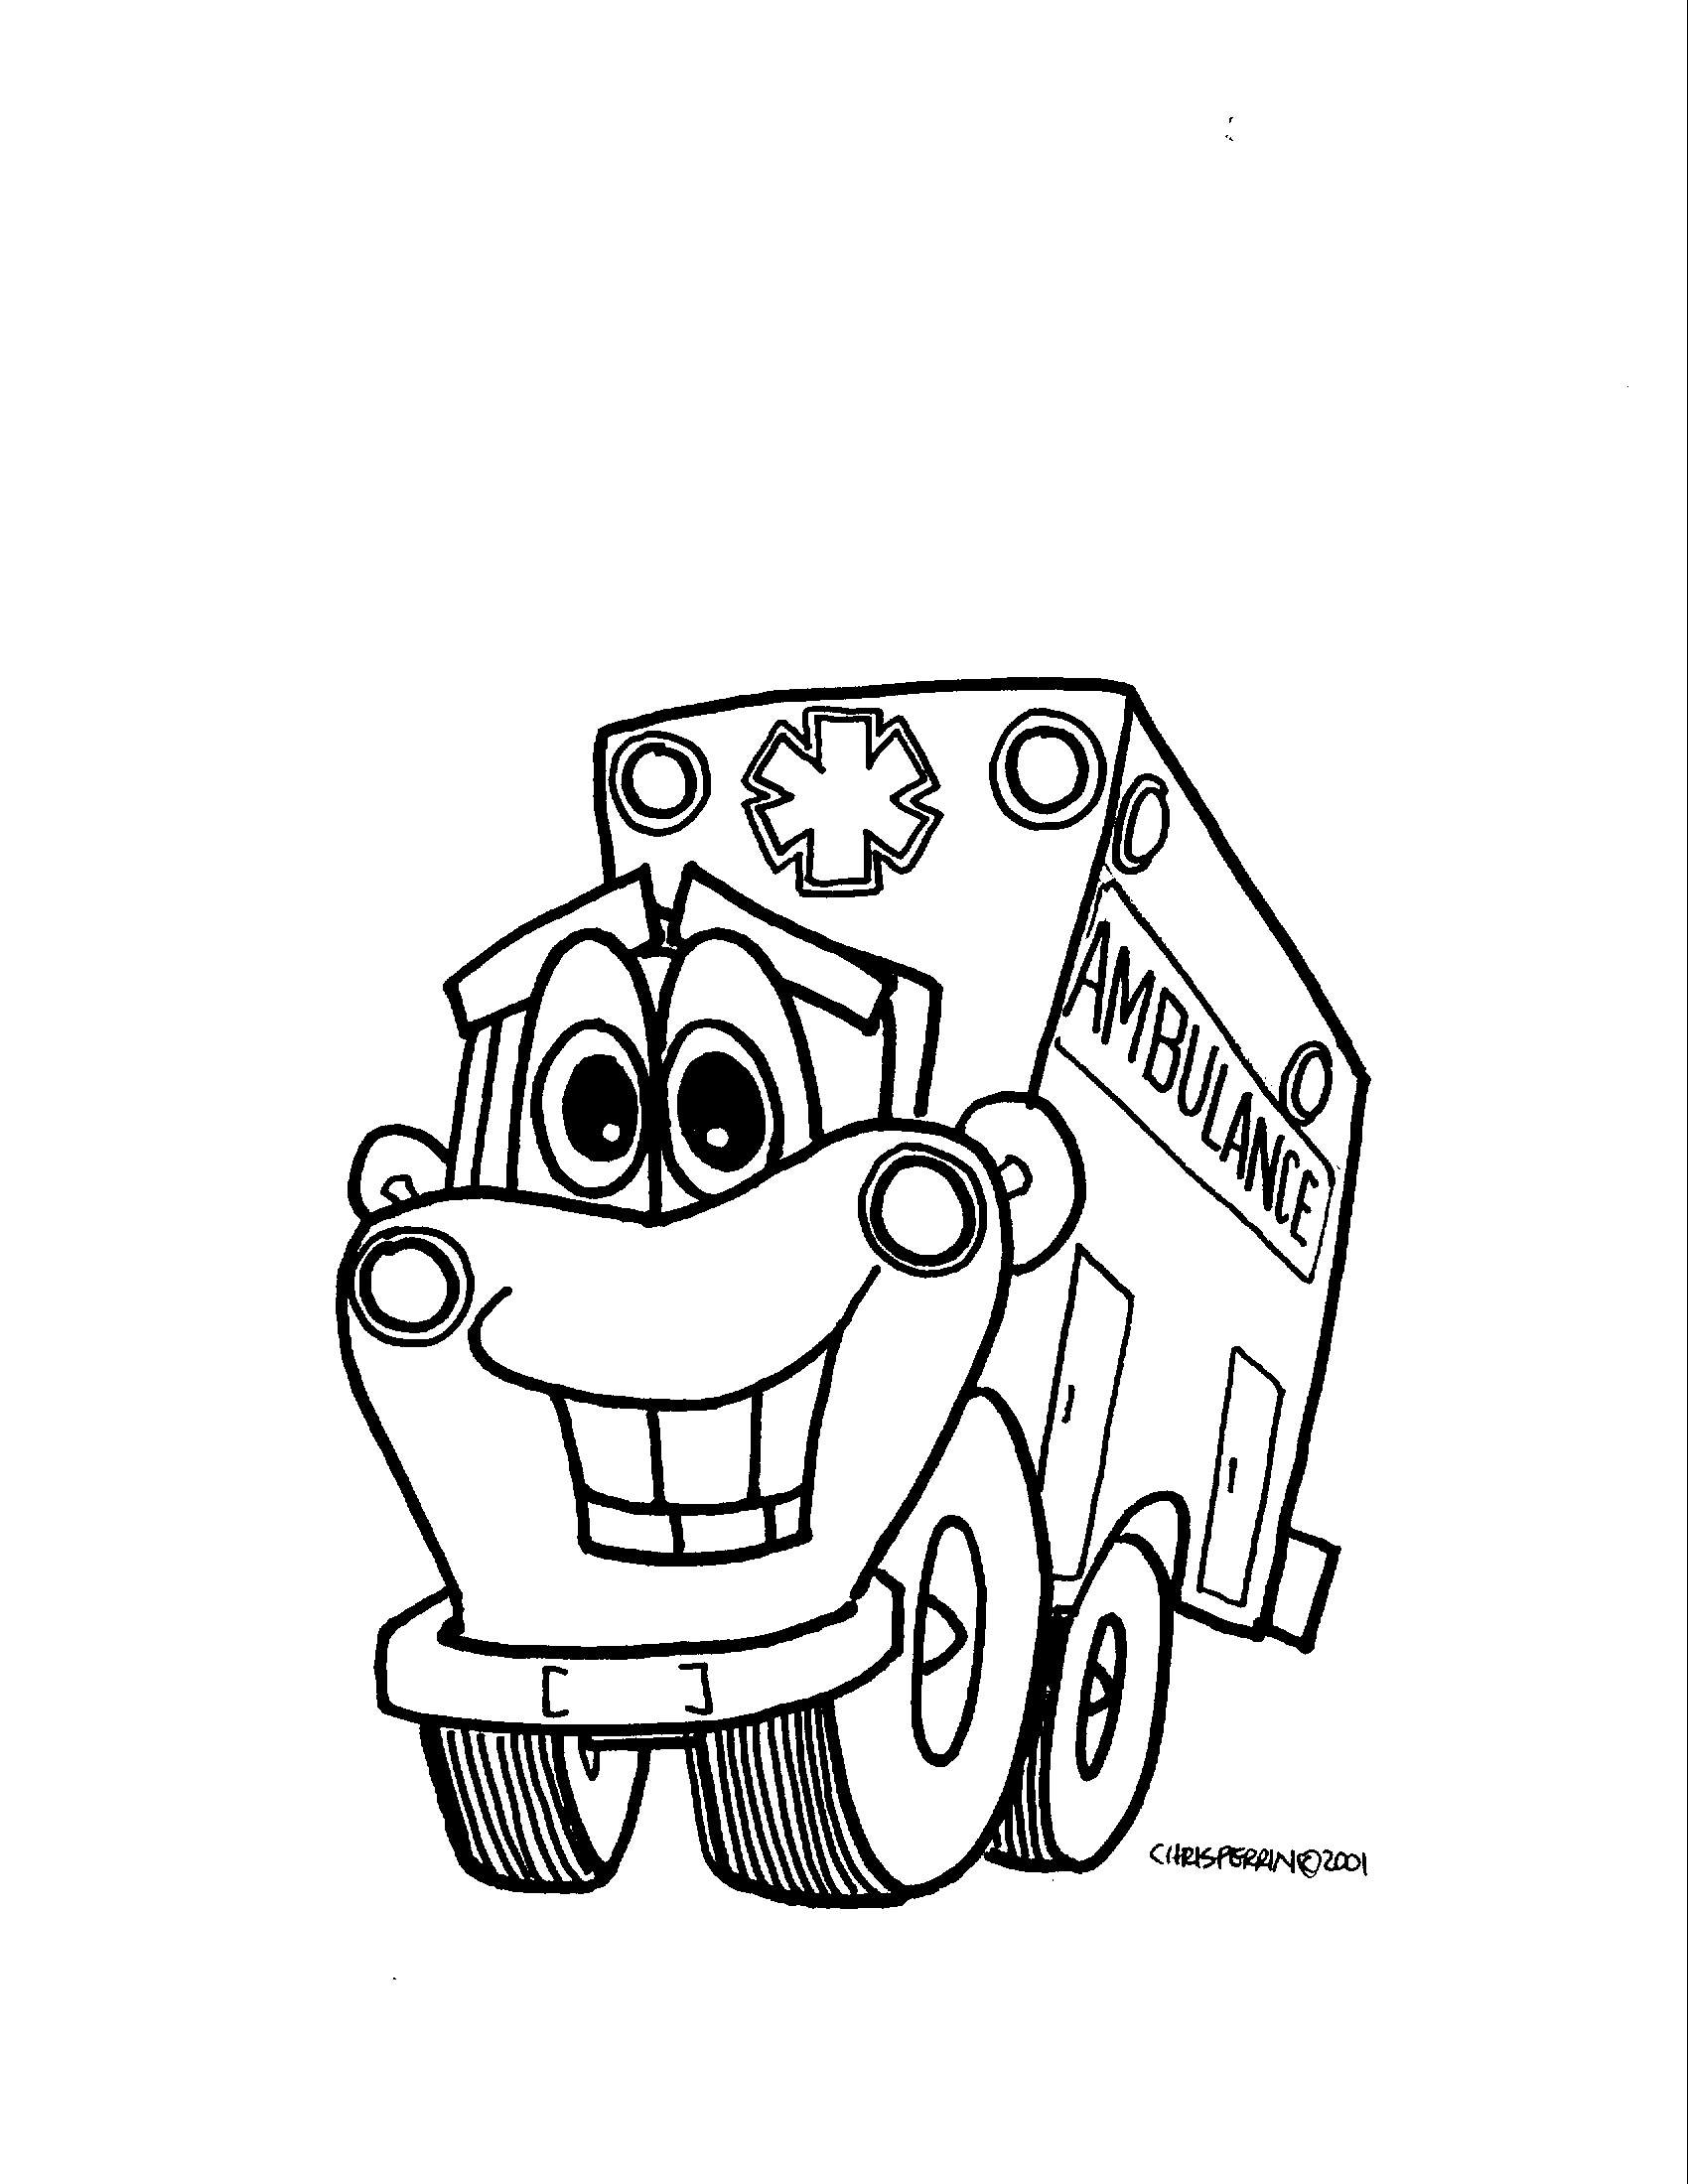 emergency vehicles coloring pages